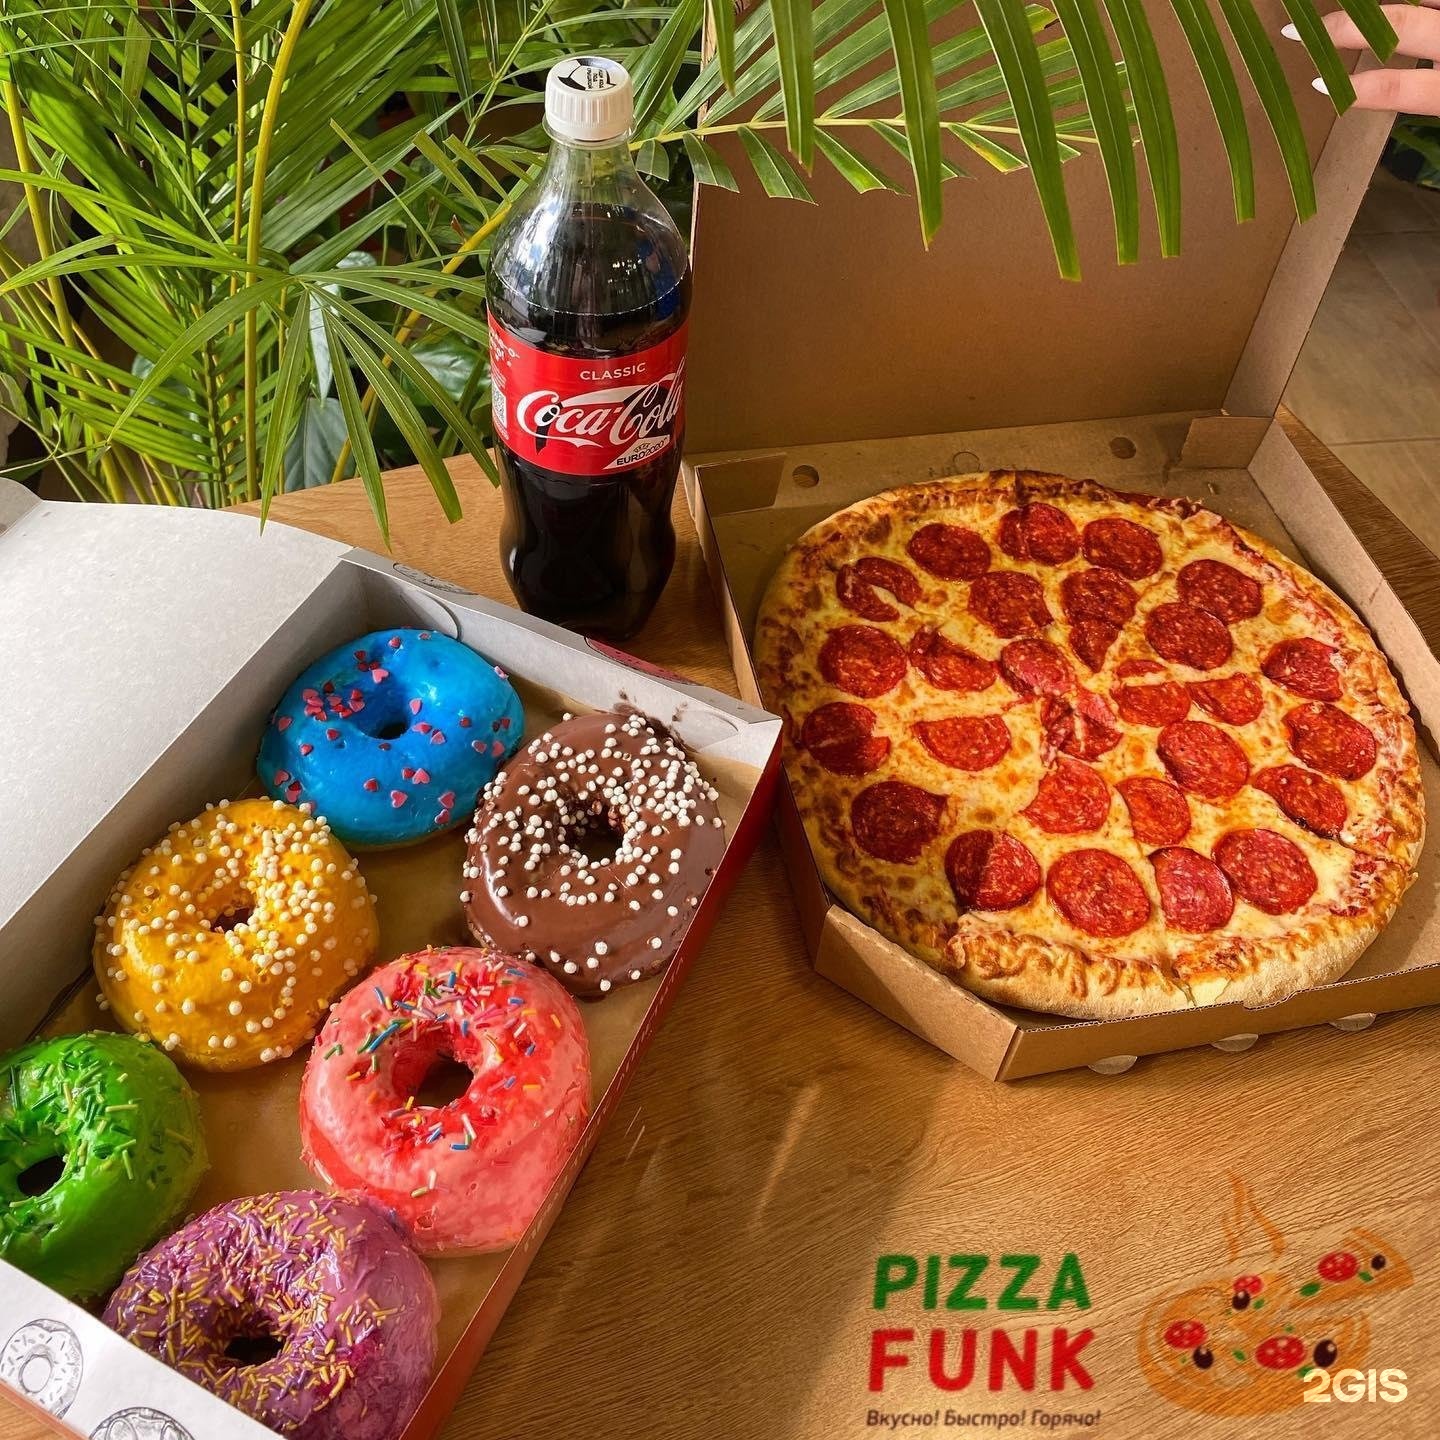 Funk do pizza 2ke. Пицца фанк. Пицца фанк 34 Волгоград. Its time to get Funky pizza Tower ананас. Funk Fo pizza Funk.